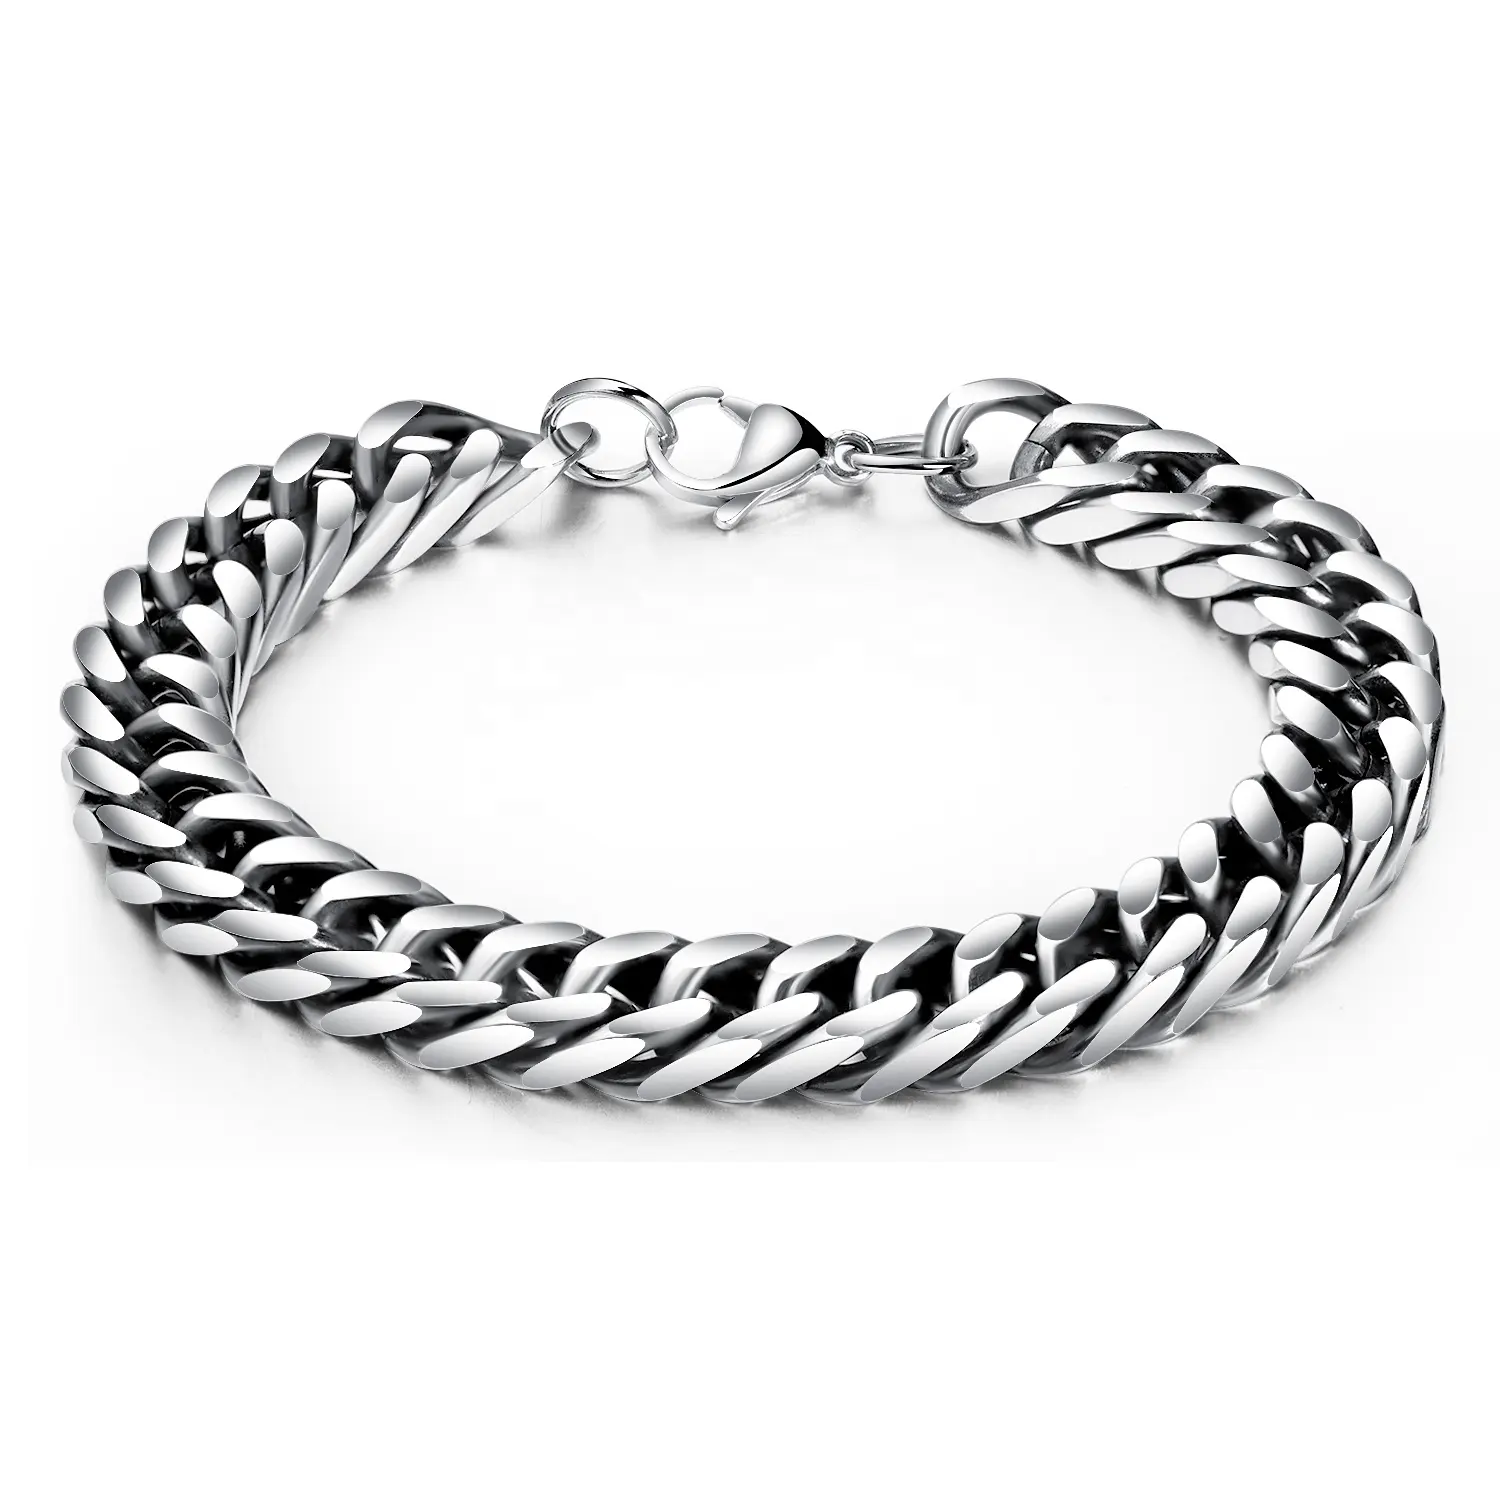 Top Quality Simple Style Design Latest Fashion Adjustable Rope Chain Bracelet For Boys cuban chain and bangle